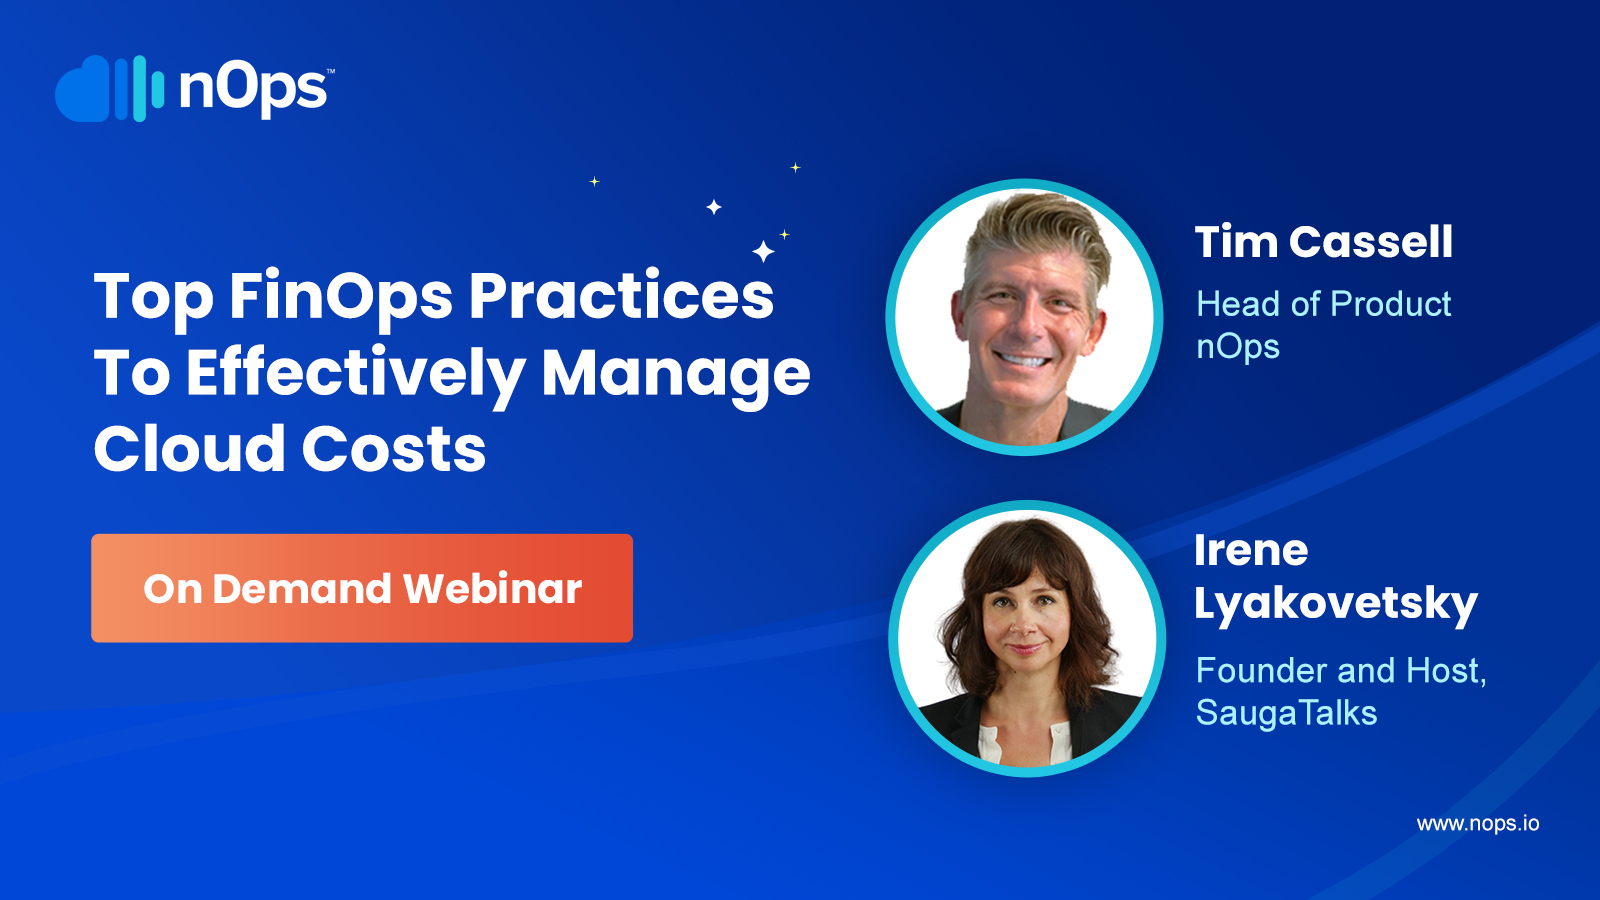 Top FinOps Practices To Effectively Manage Cloud Costs